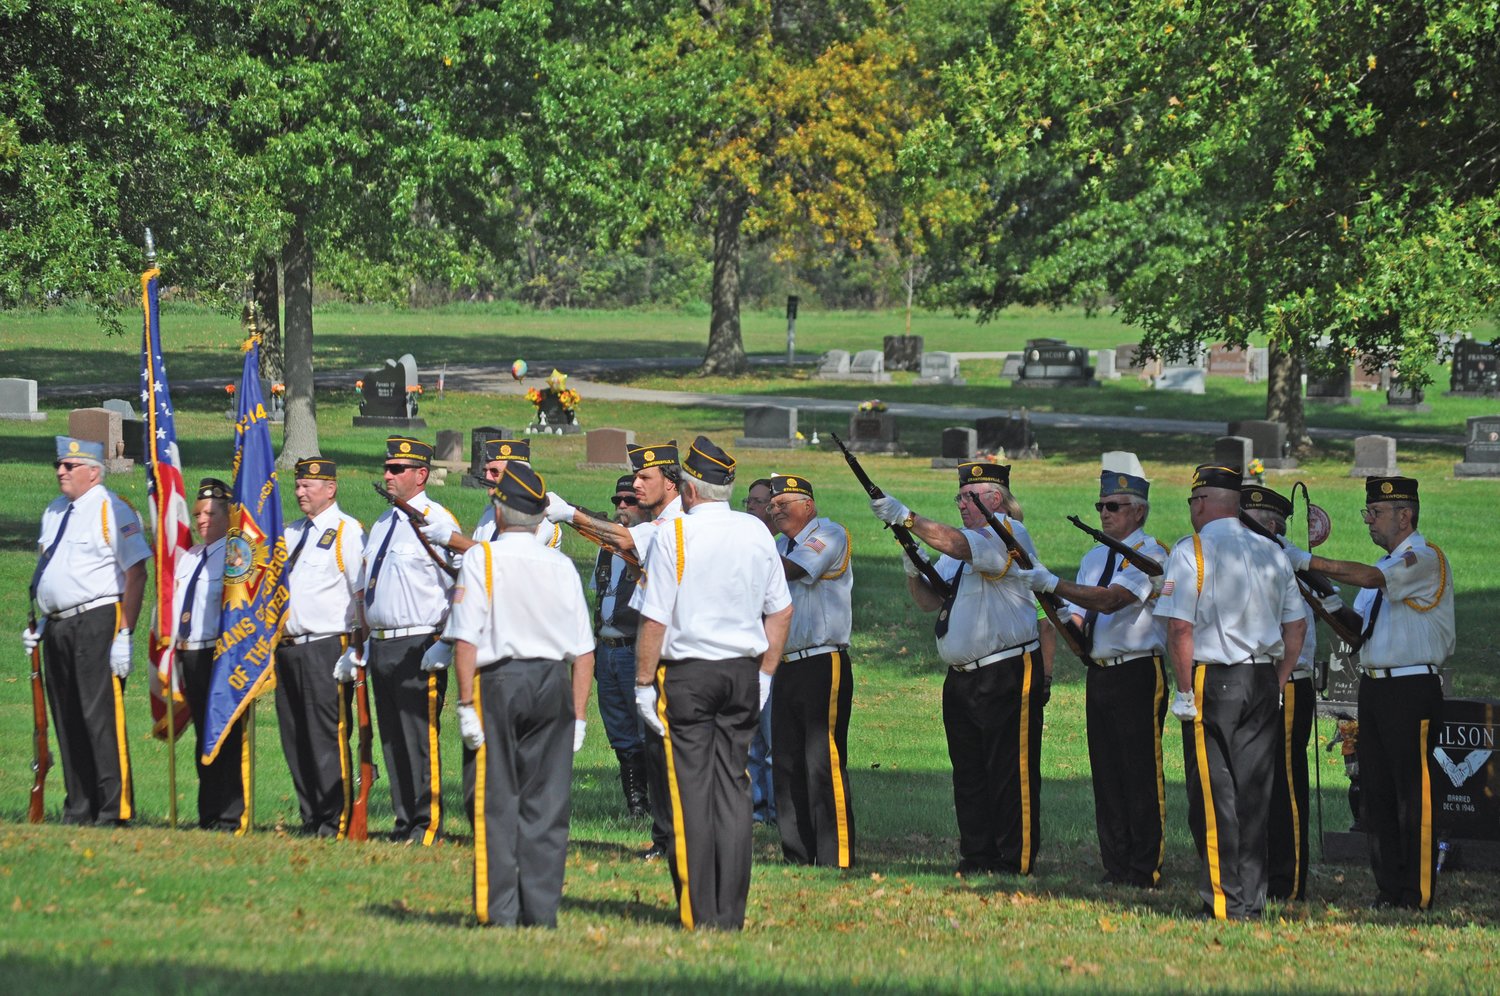 The Byron Cox Post 72 Honor Guard performs a gun salute at the graveside services for longtime Crawfordsville Fire Chief Dennis Weir at Oak Hill Cemetery North on Monday.